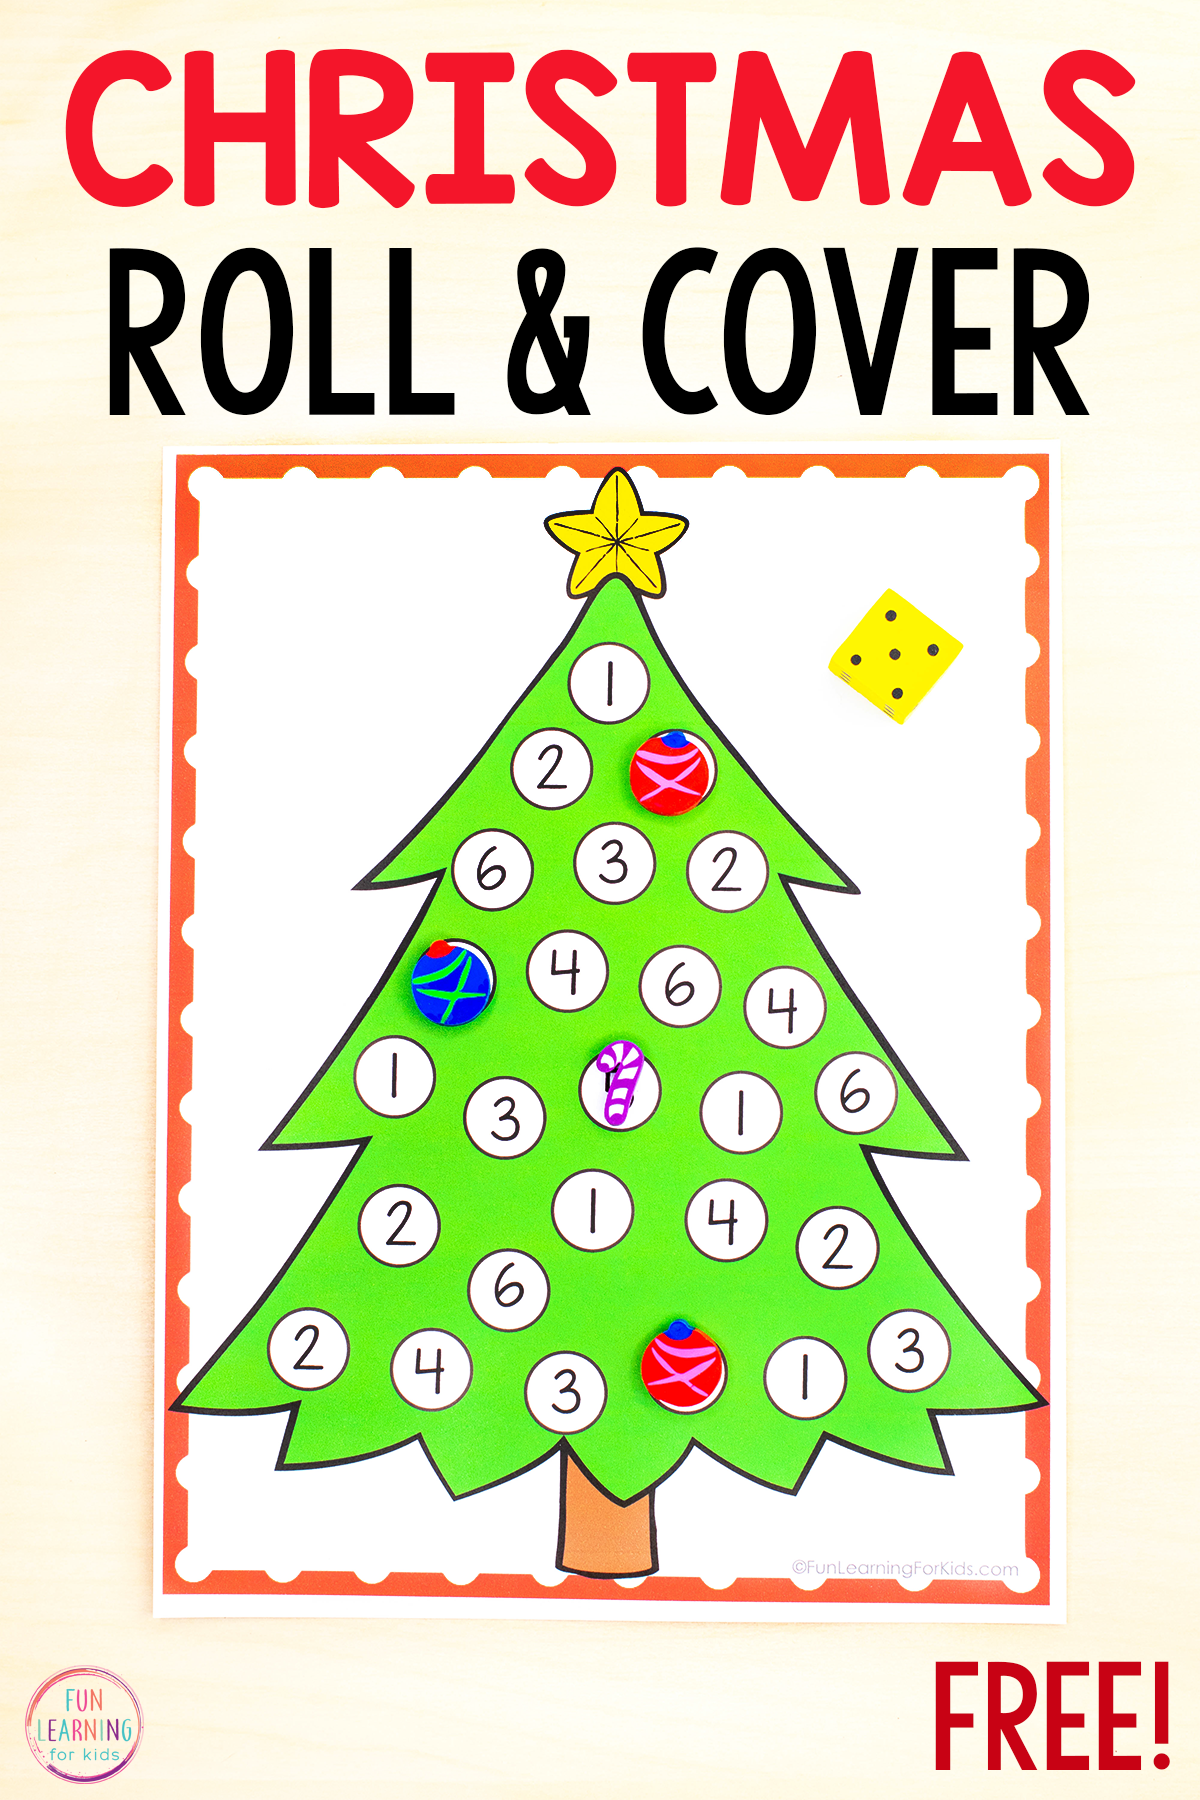 Christmas tree roll and cover number printable mats